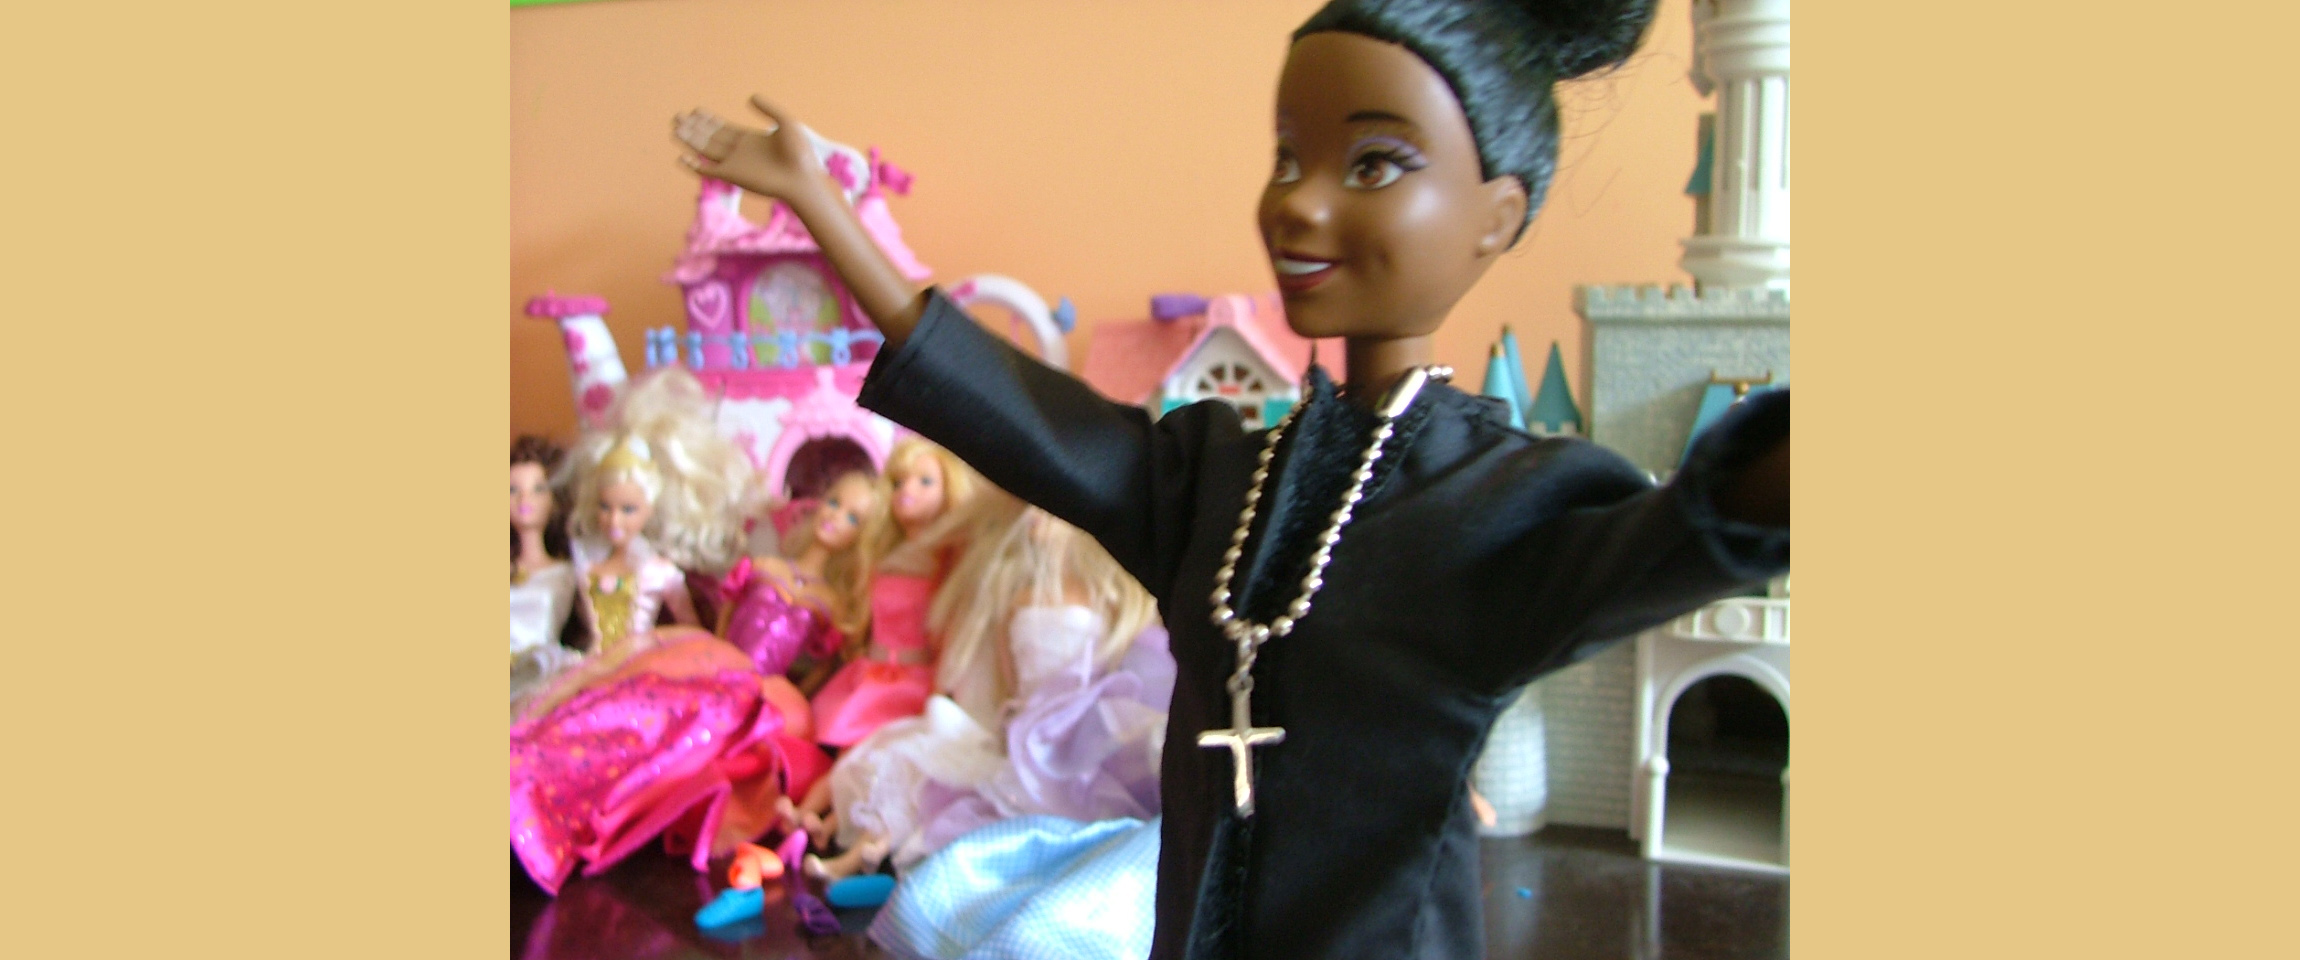 Indian 1st Time Scholl Doll Romance - It's time for Pastor Barbie â€“ Baptist News Global